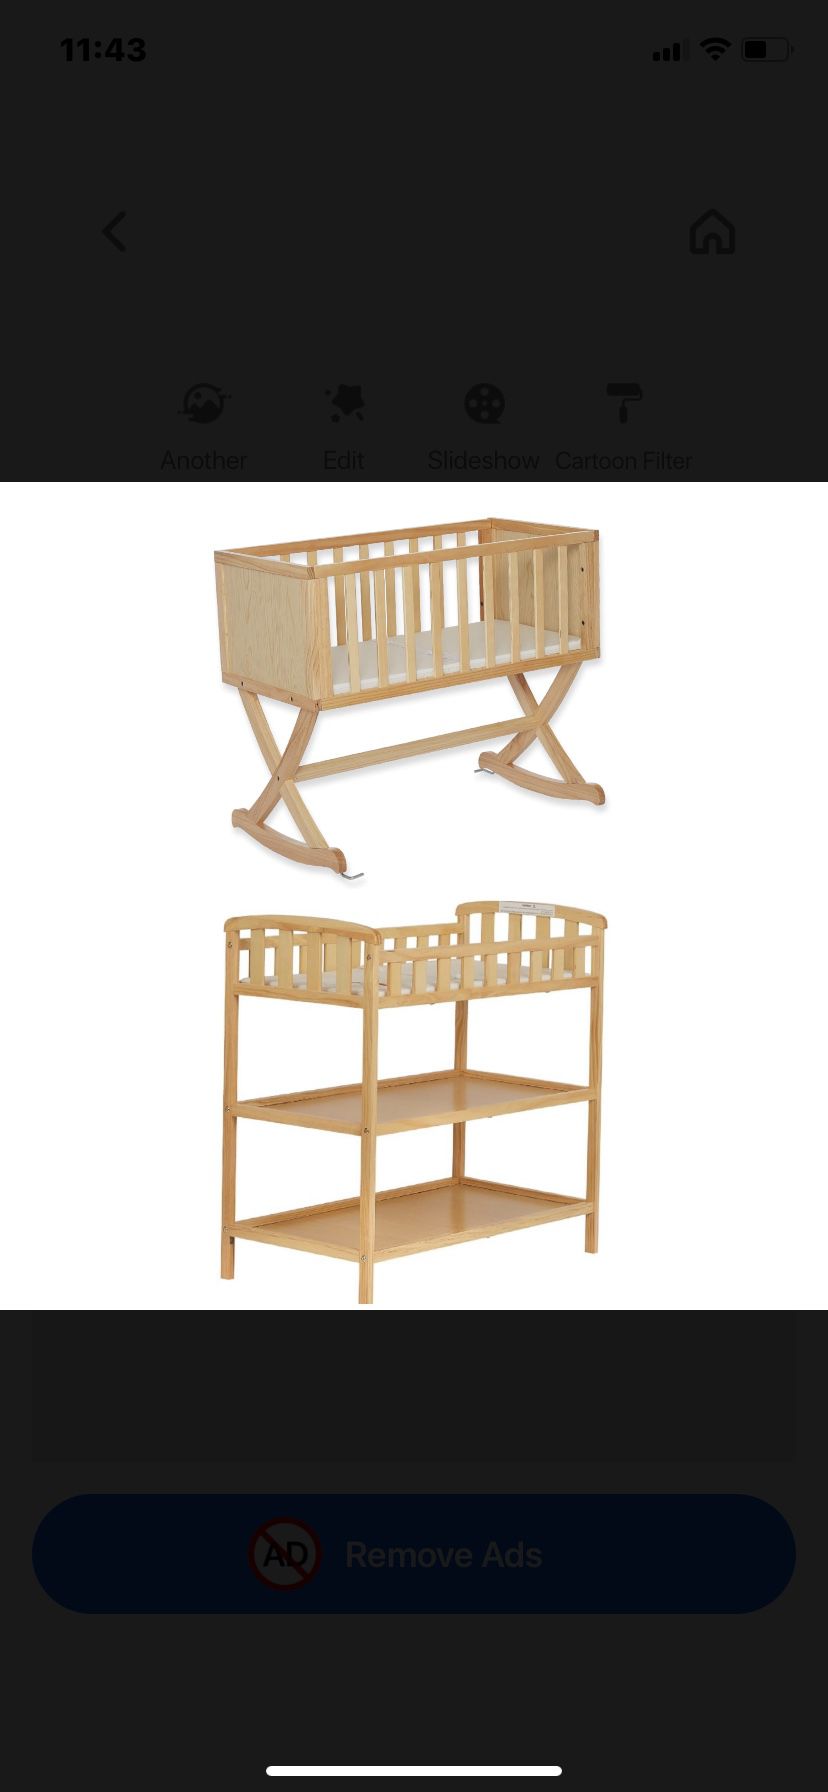 New- Dream On Me Cradle And Changing Table Set - New Zealand Pine